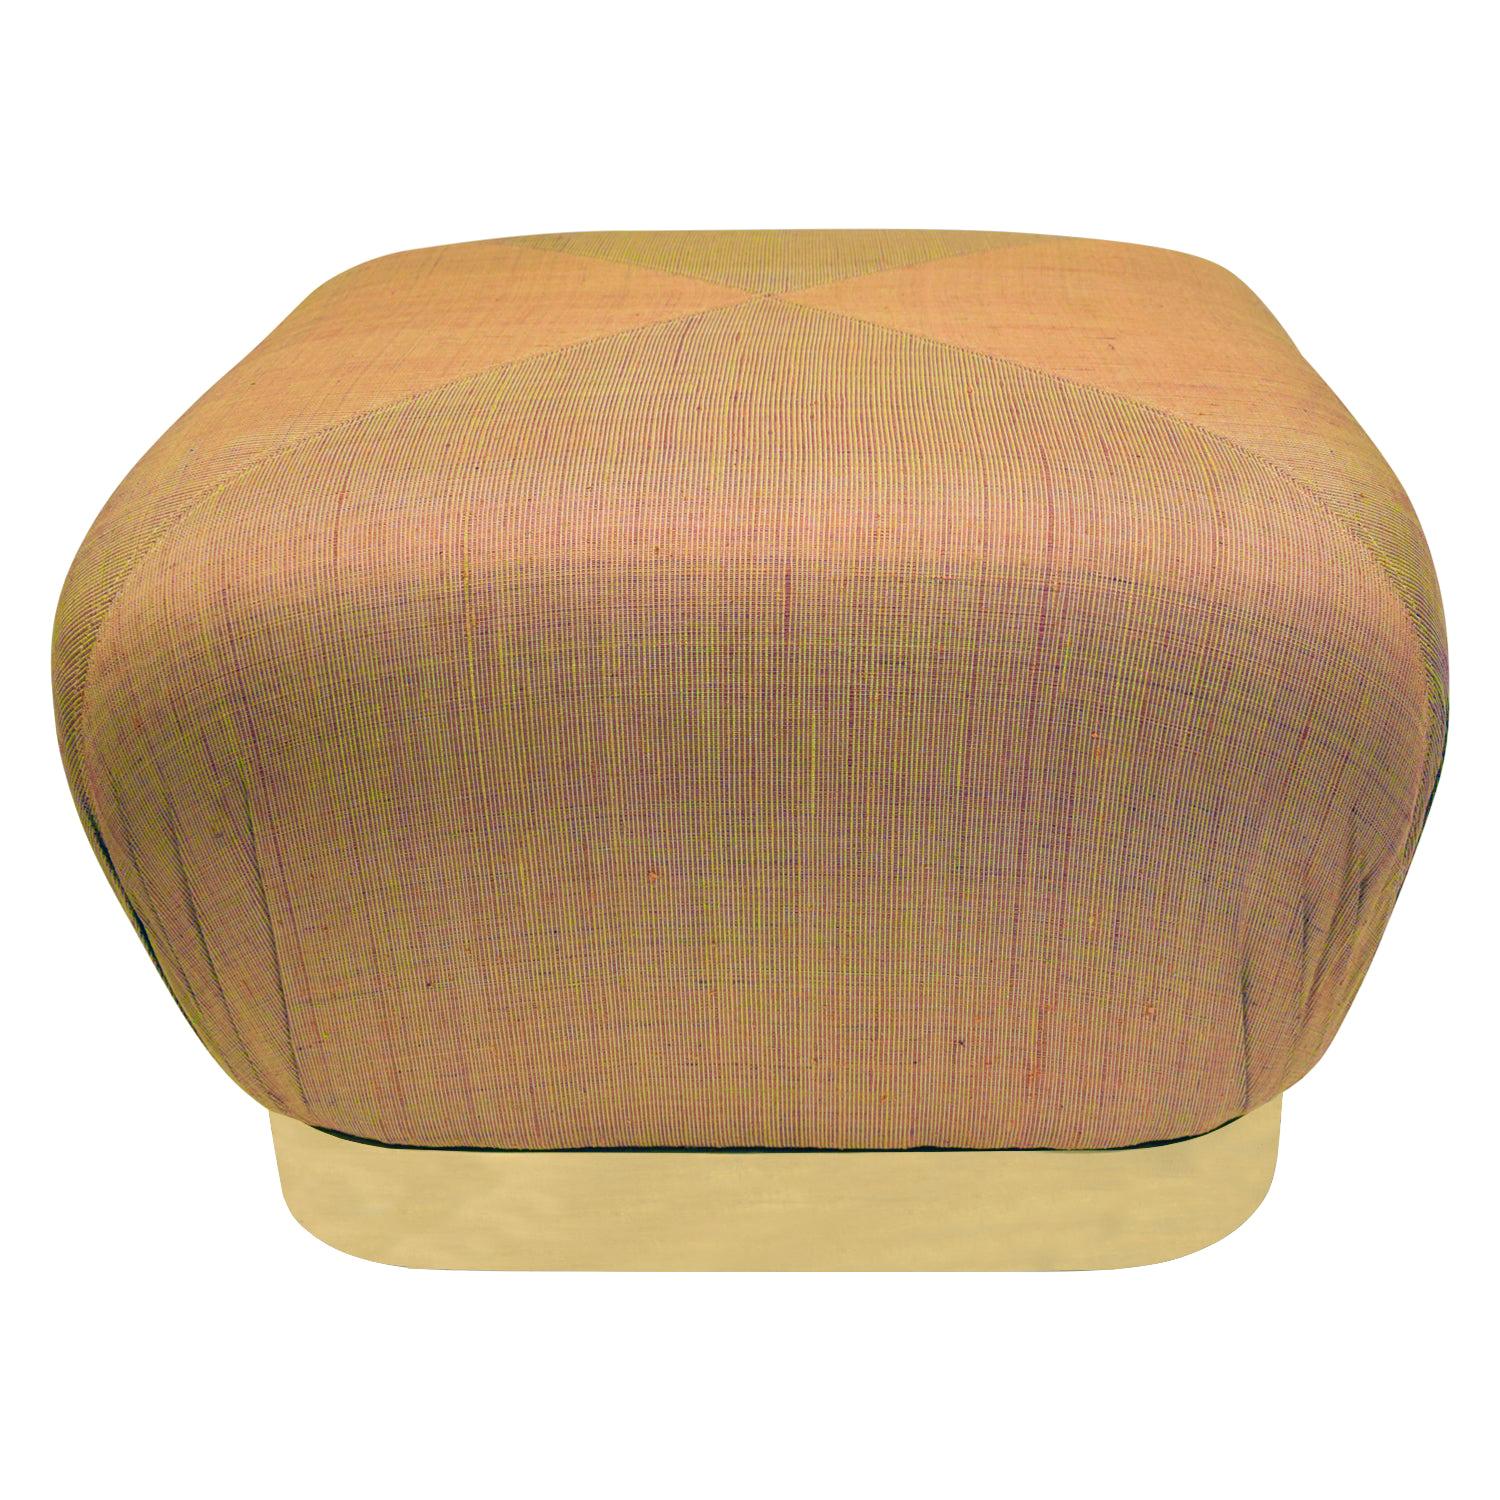 Karl Springer "Souffle Ottoman" in Brass and Silk Upholstery, 1980s